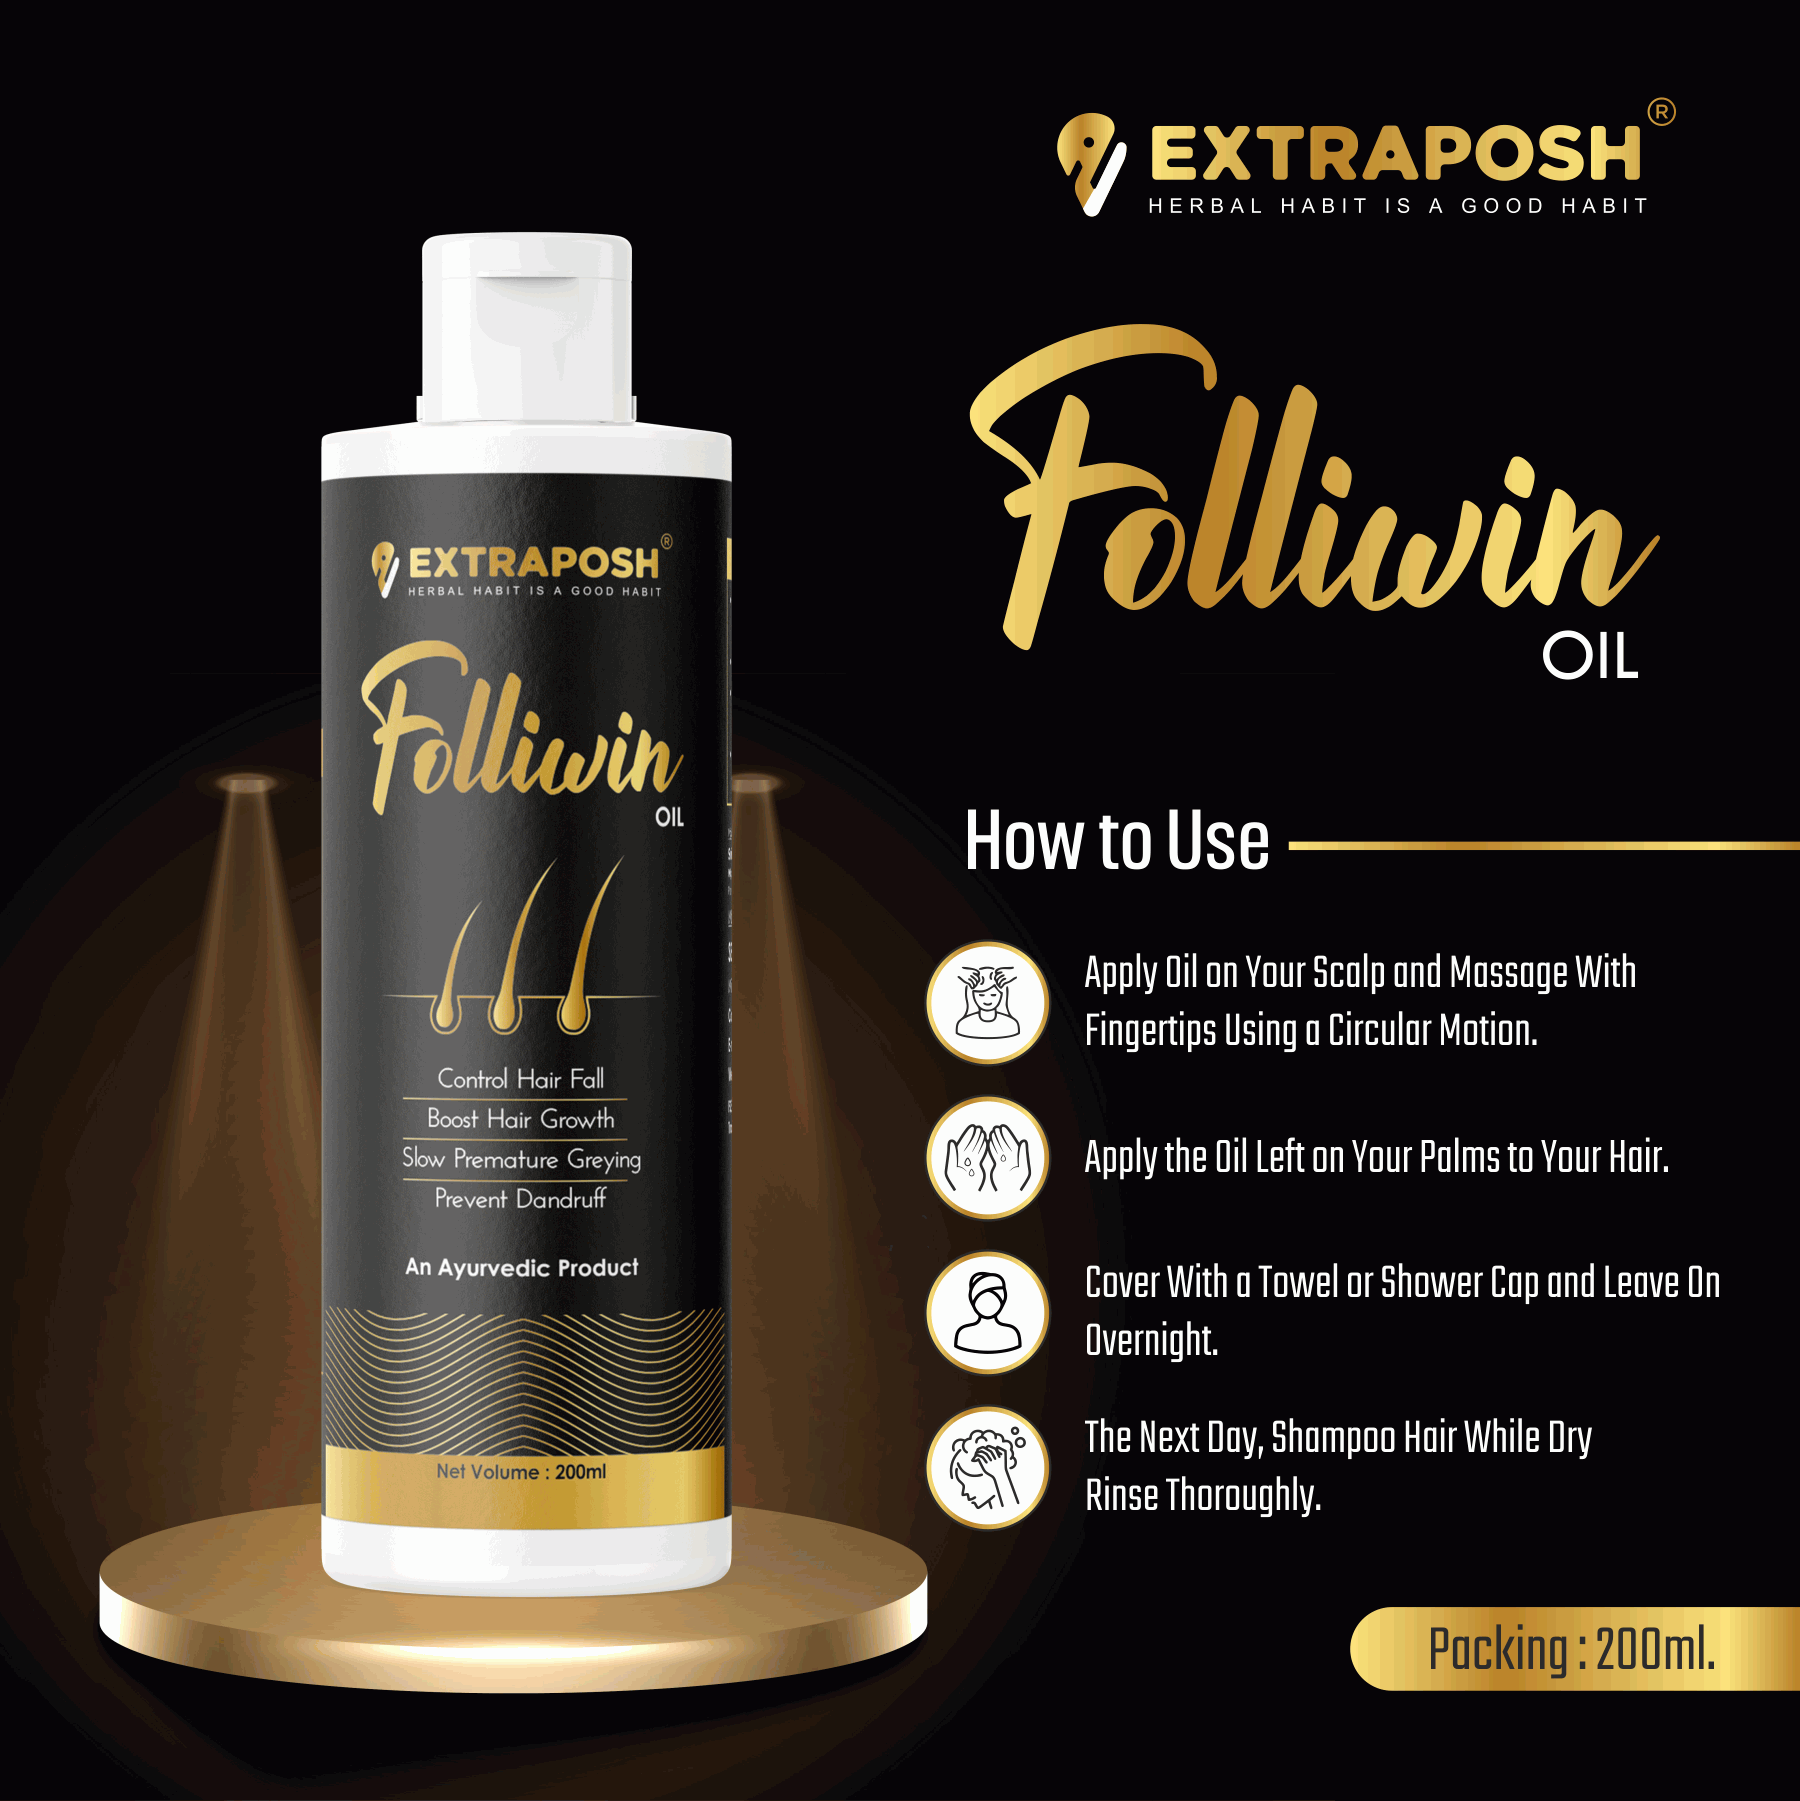 Apply Folliwin hair oil pn ypur scalp and massage with fingers using a circular motion next day shampoo hair while dry rinse thoroughly